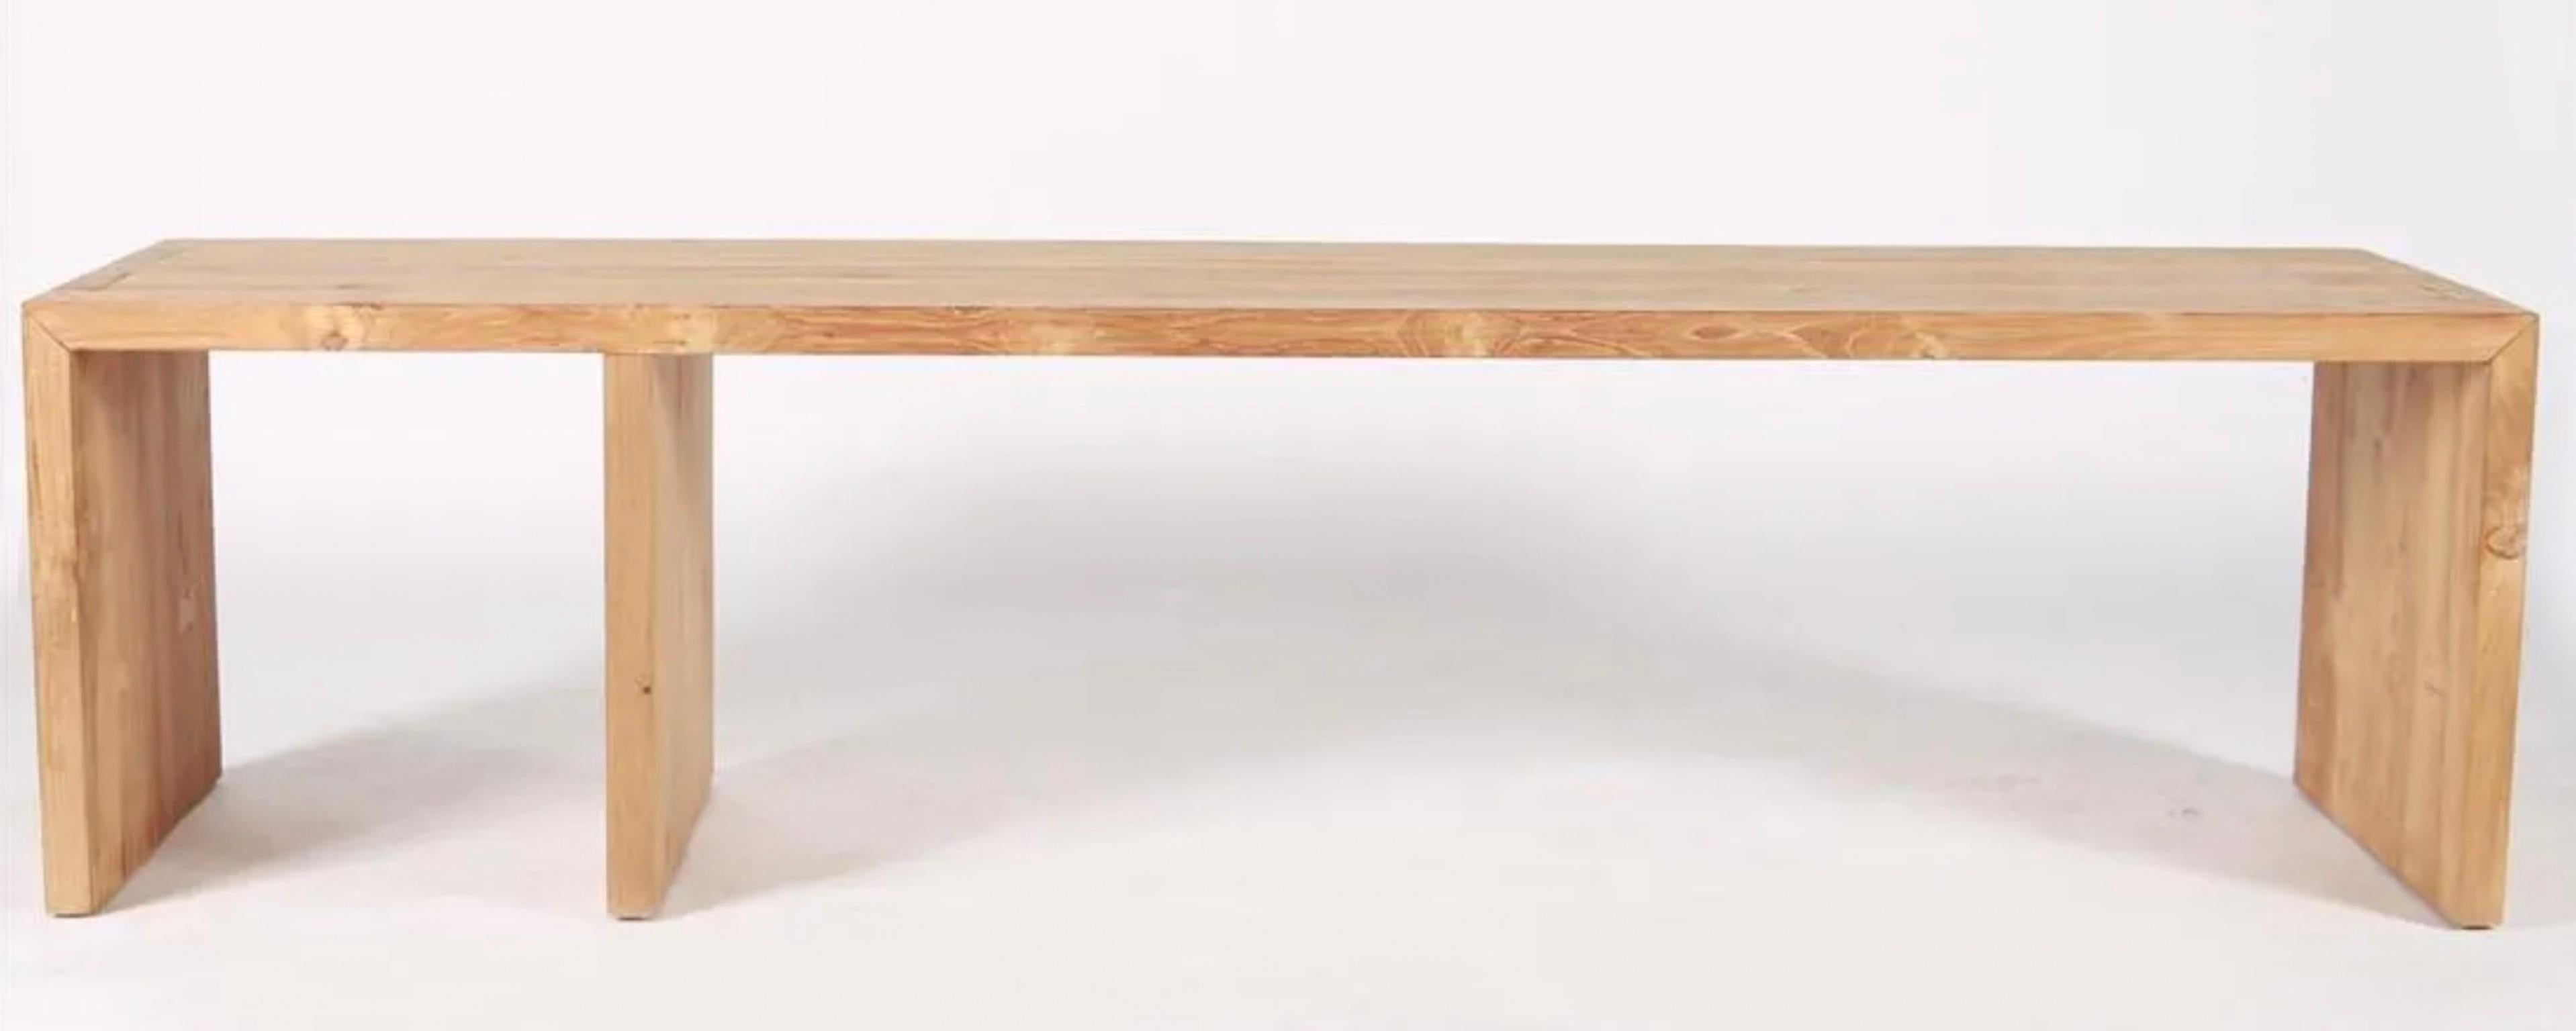 20th Century Midcentury Solid Cherry American Studio Craft Bench on 3 Legs with Bowtie Joints For Sale